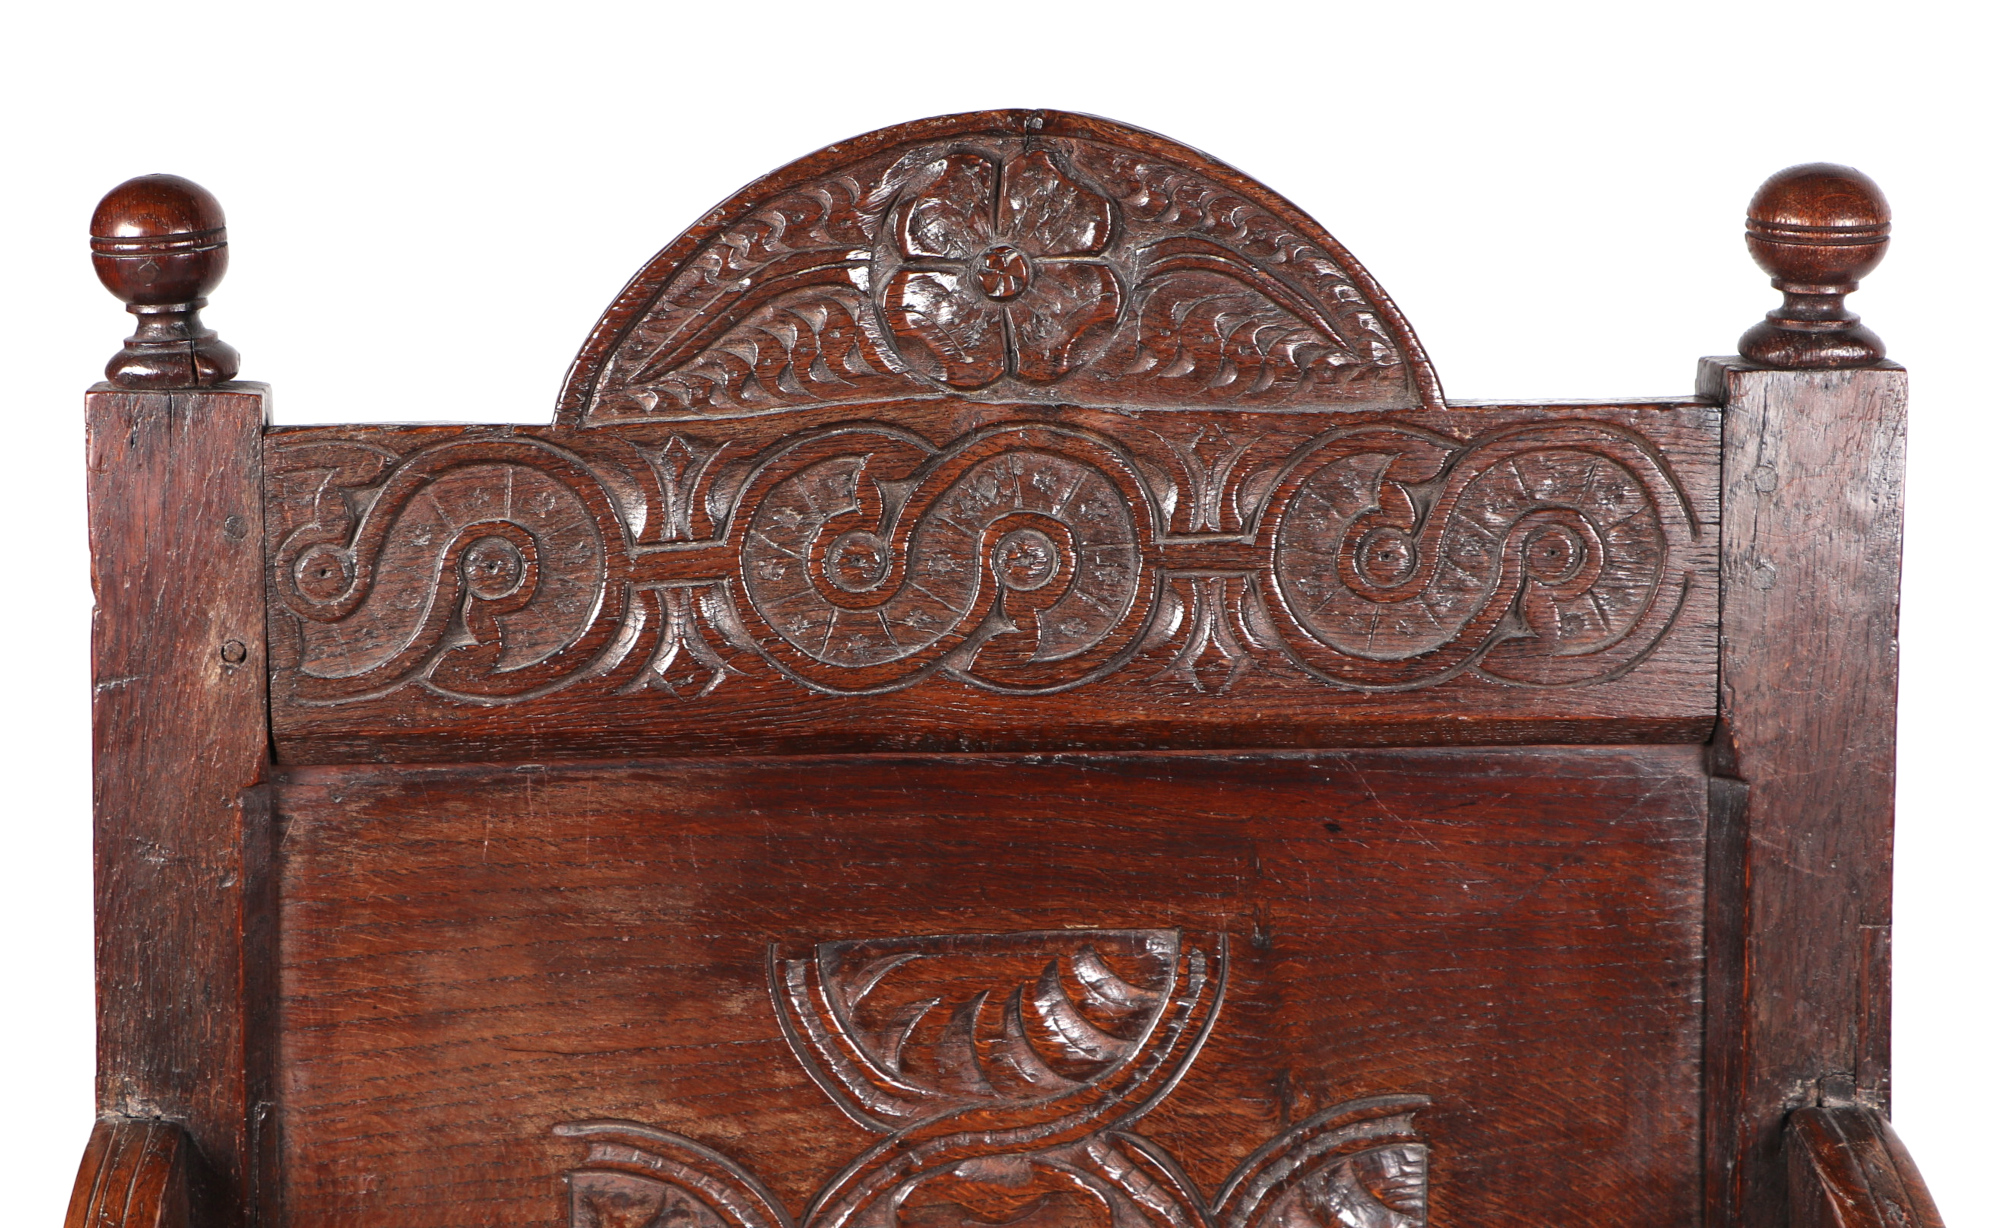 An 18th century style Wainscot type oak chair. - Image 8 of 8